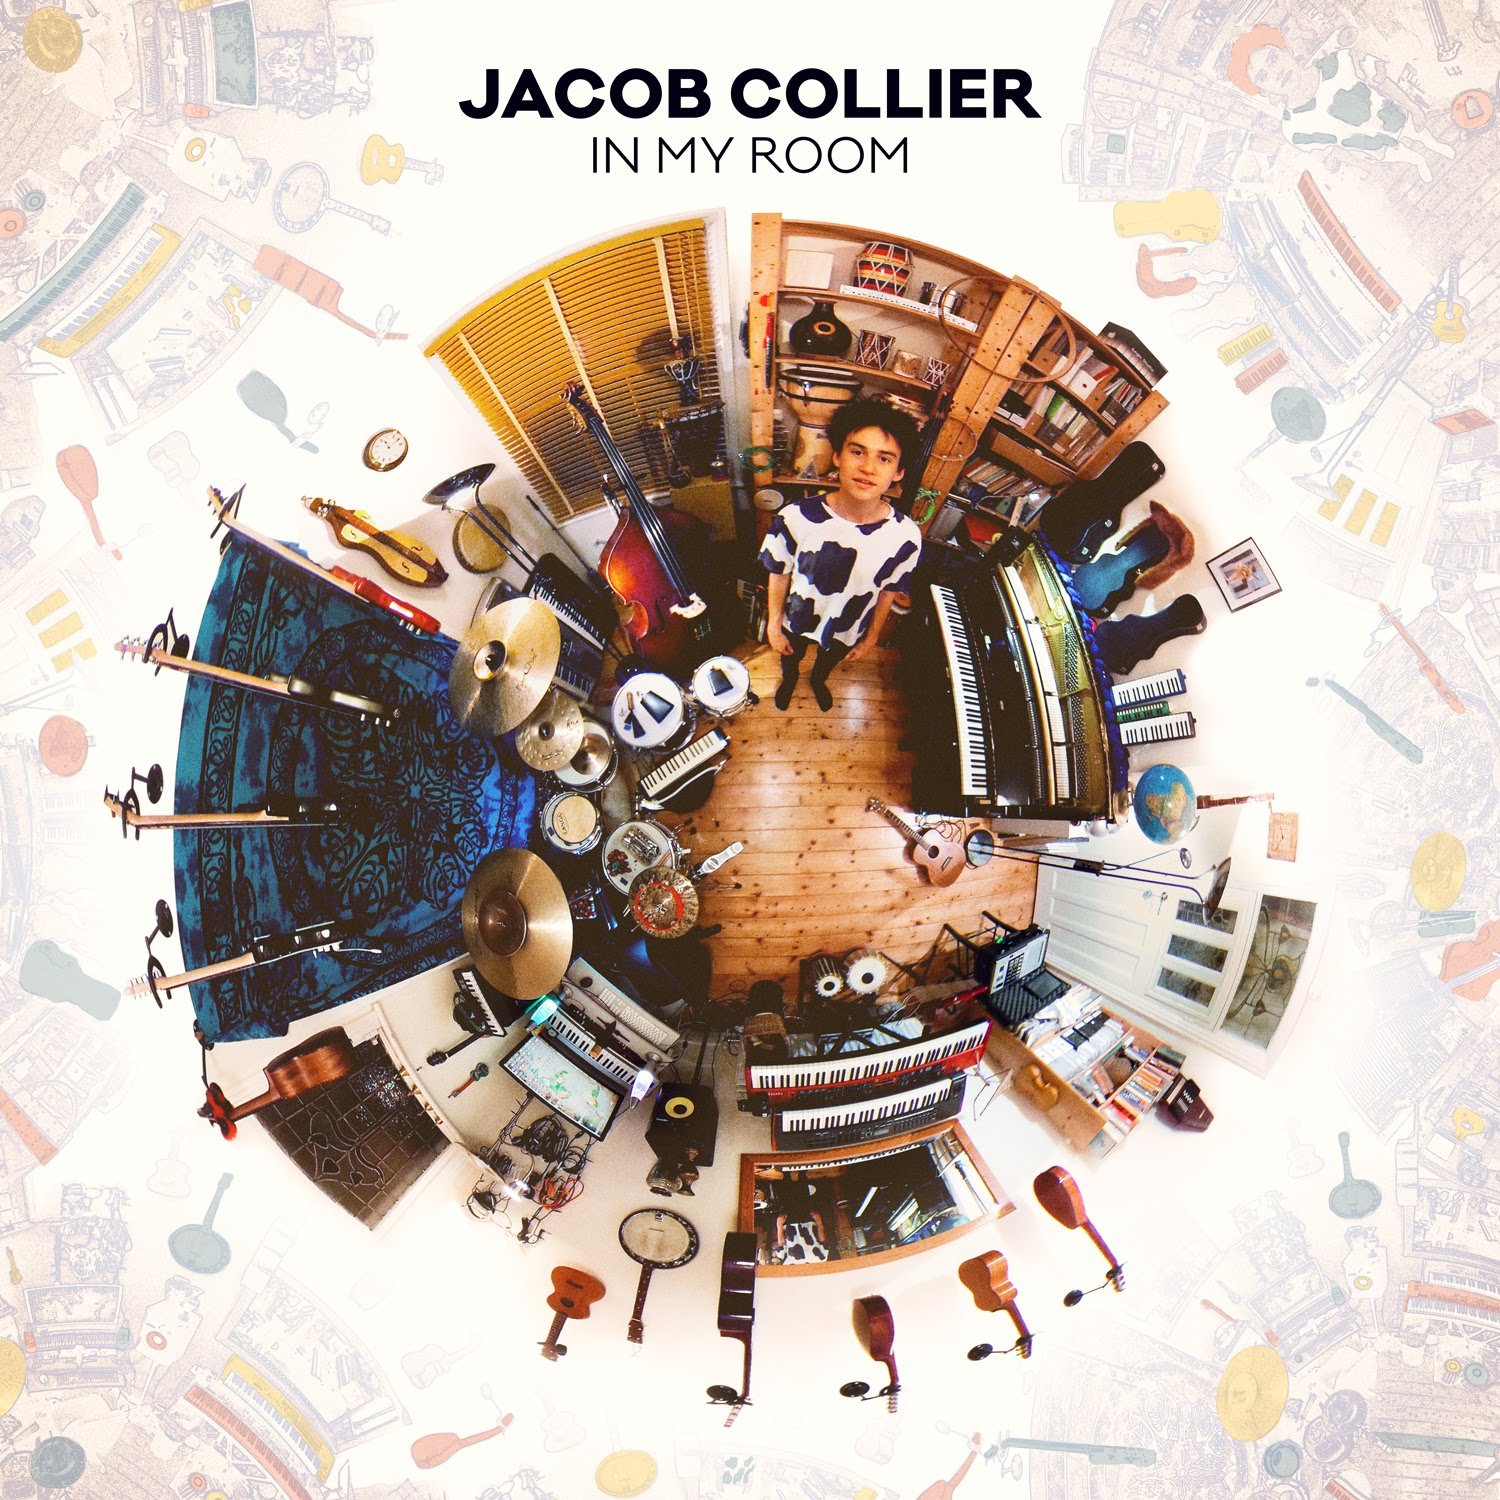 In My Room - Jacob Collier - Listen and discove